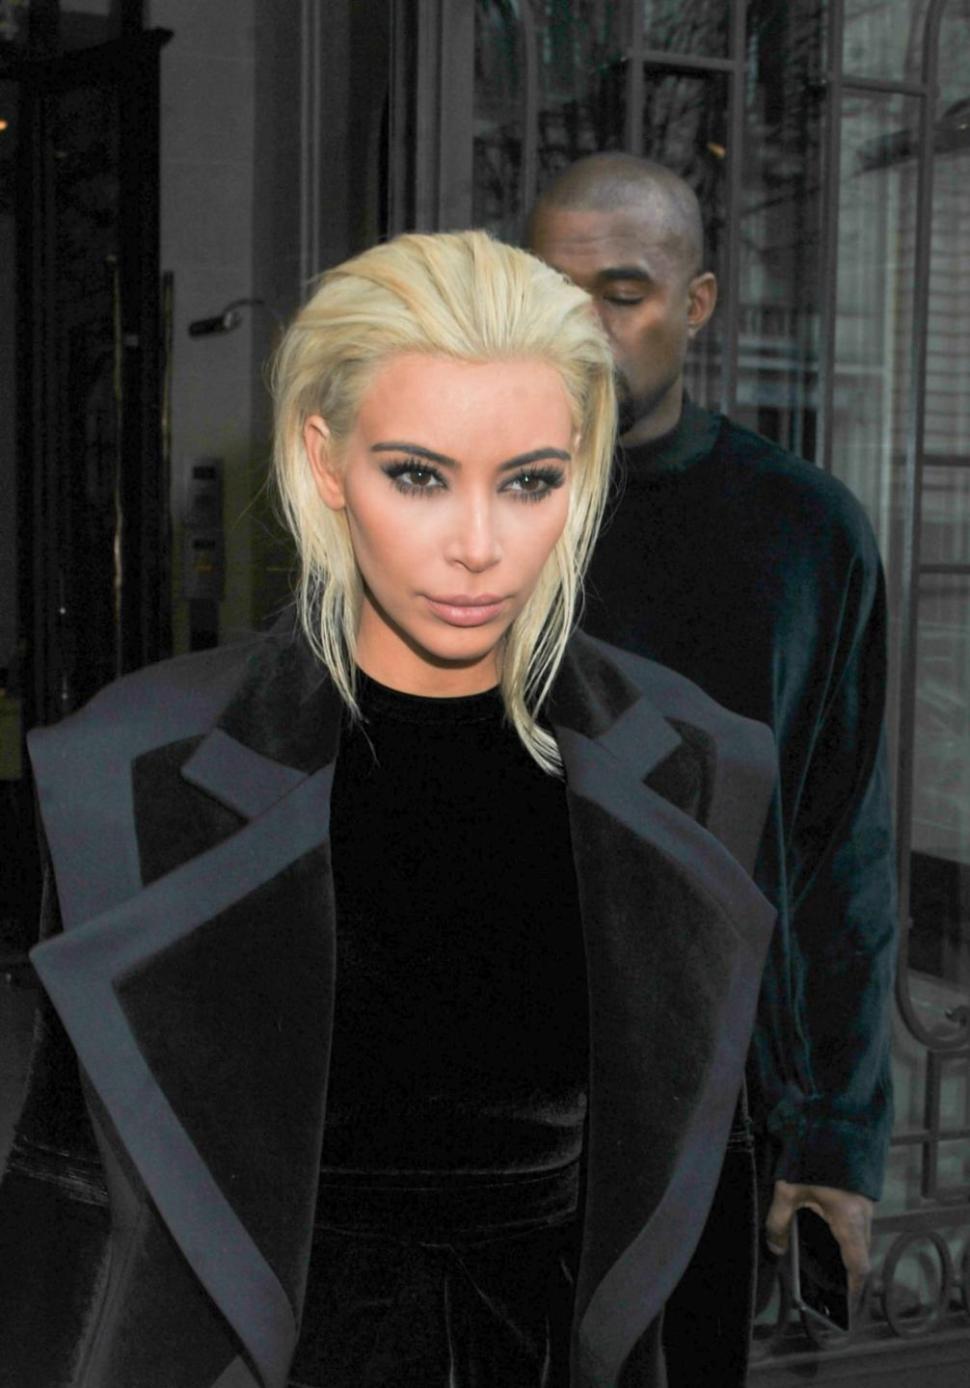 Kim Kardashian shocked onlookers with her dramatic new look Thursday in Paris.